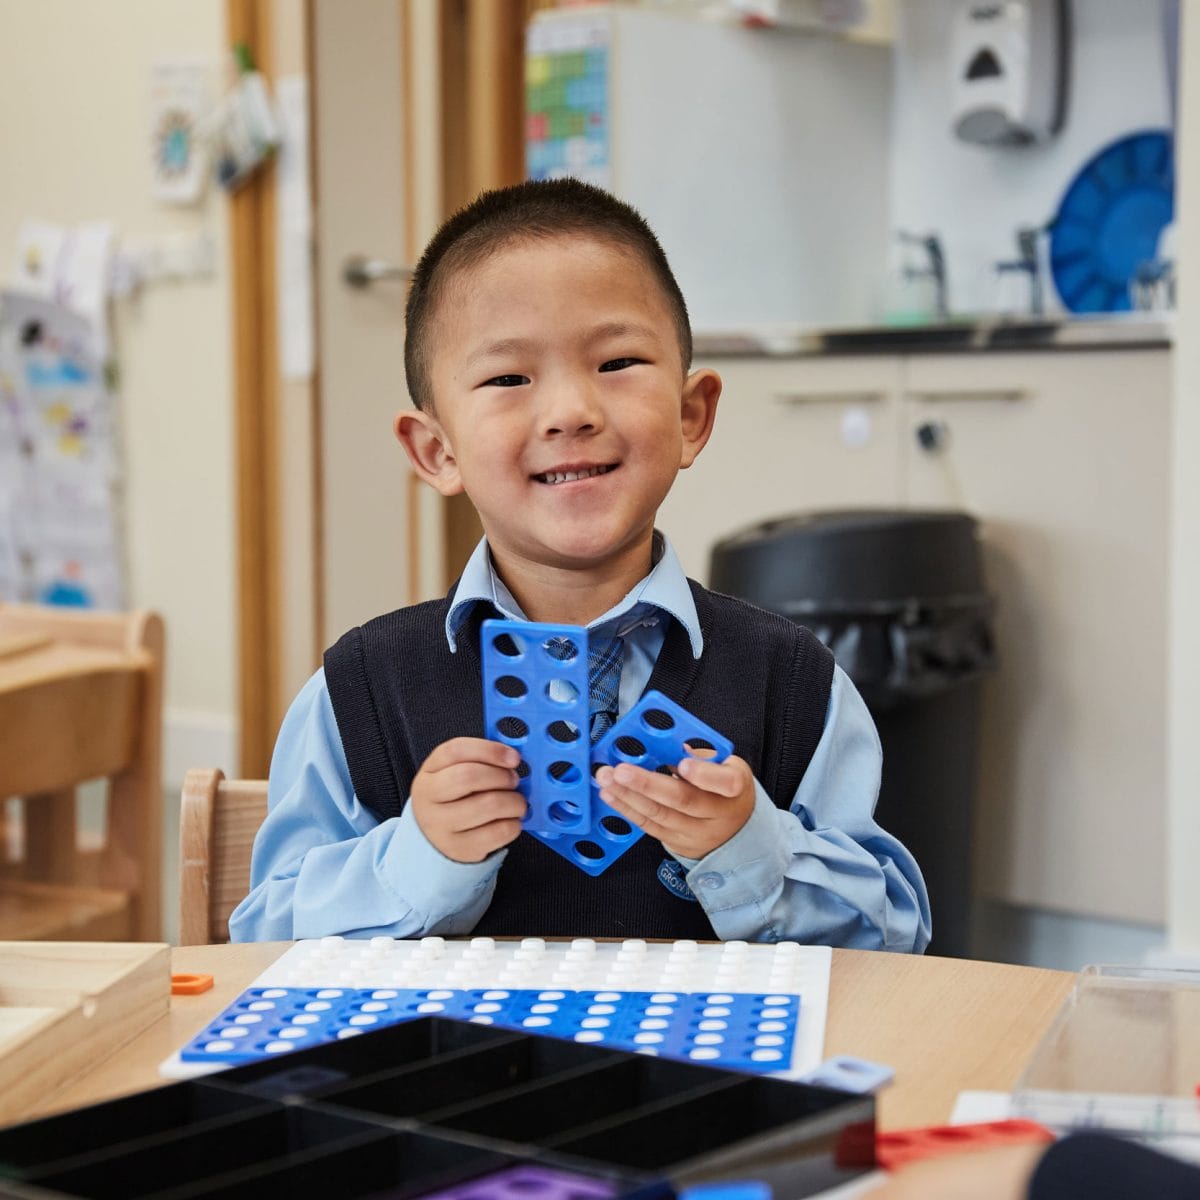 A boy in Nursery smiling at the camera holding a numicon shape.